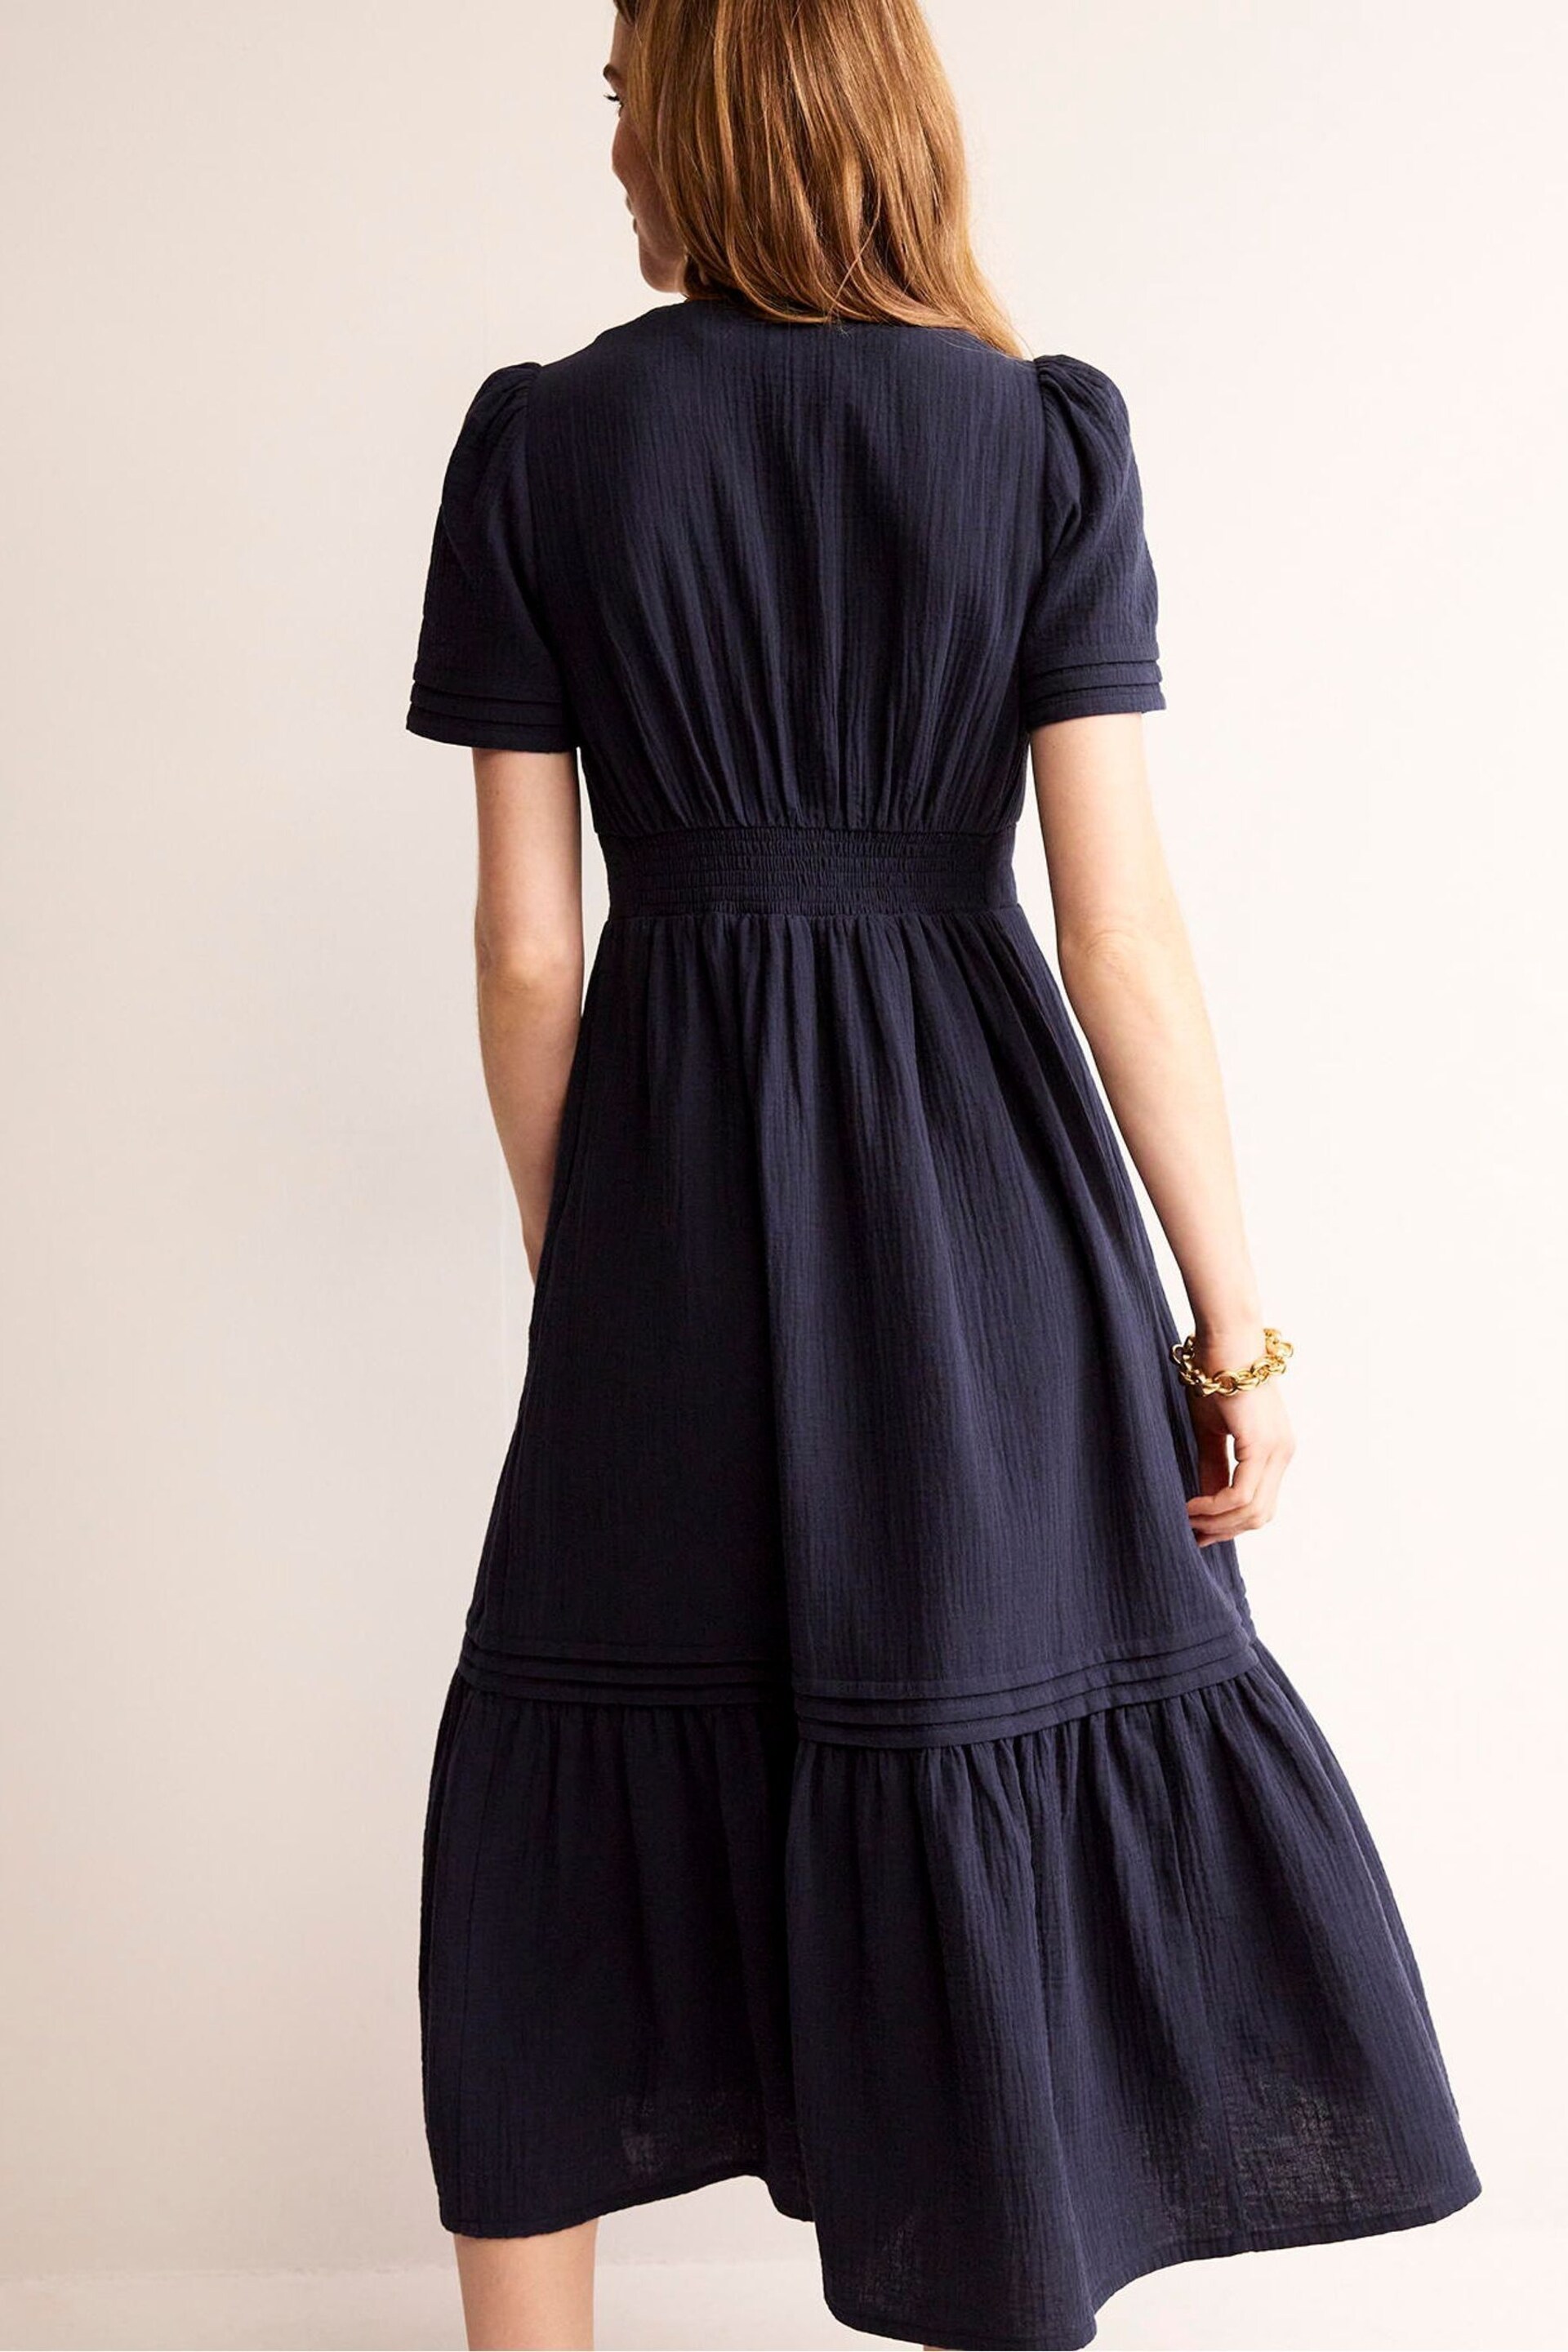 Boden Blue Eve Double Cloth Midi Dress - Image 3 of 7